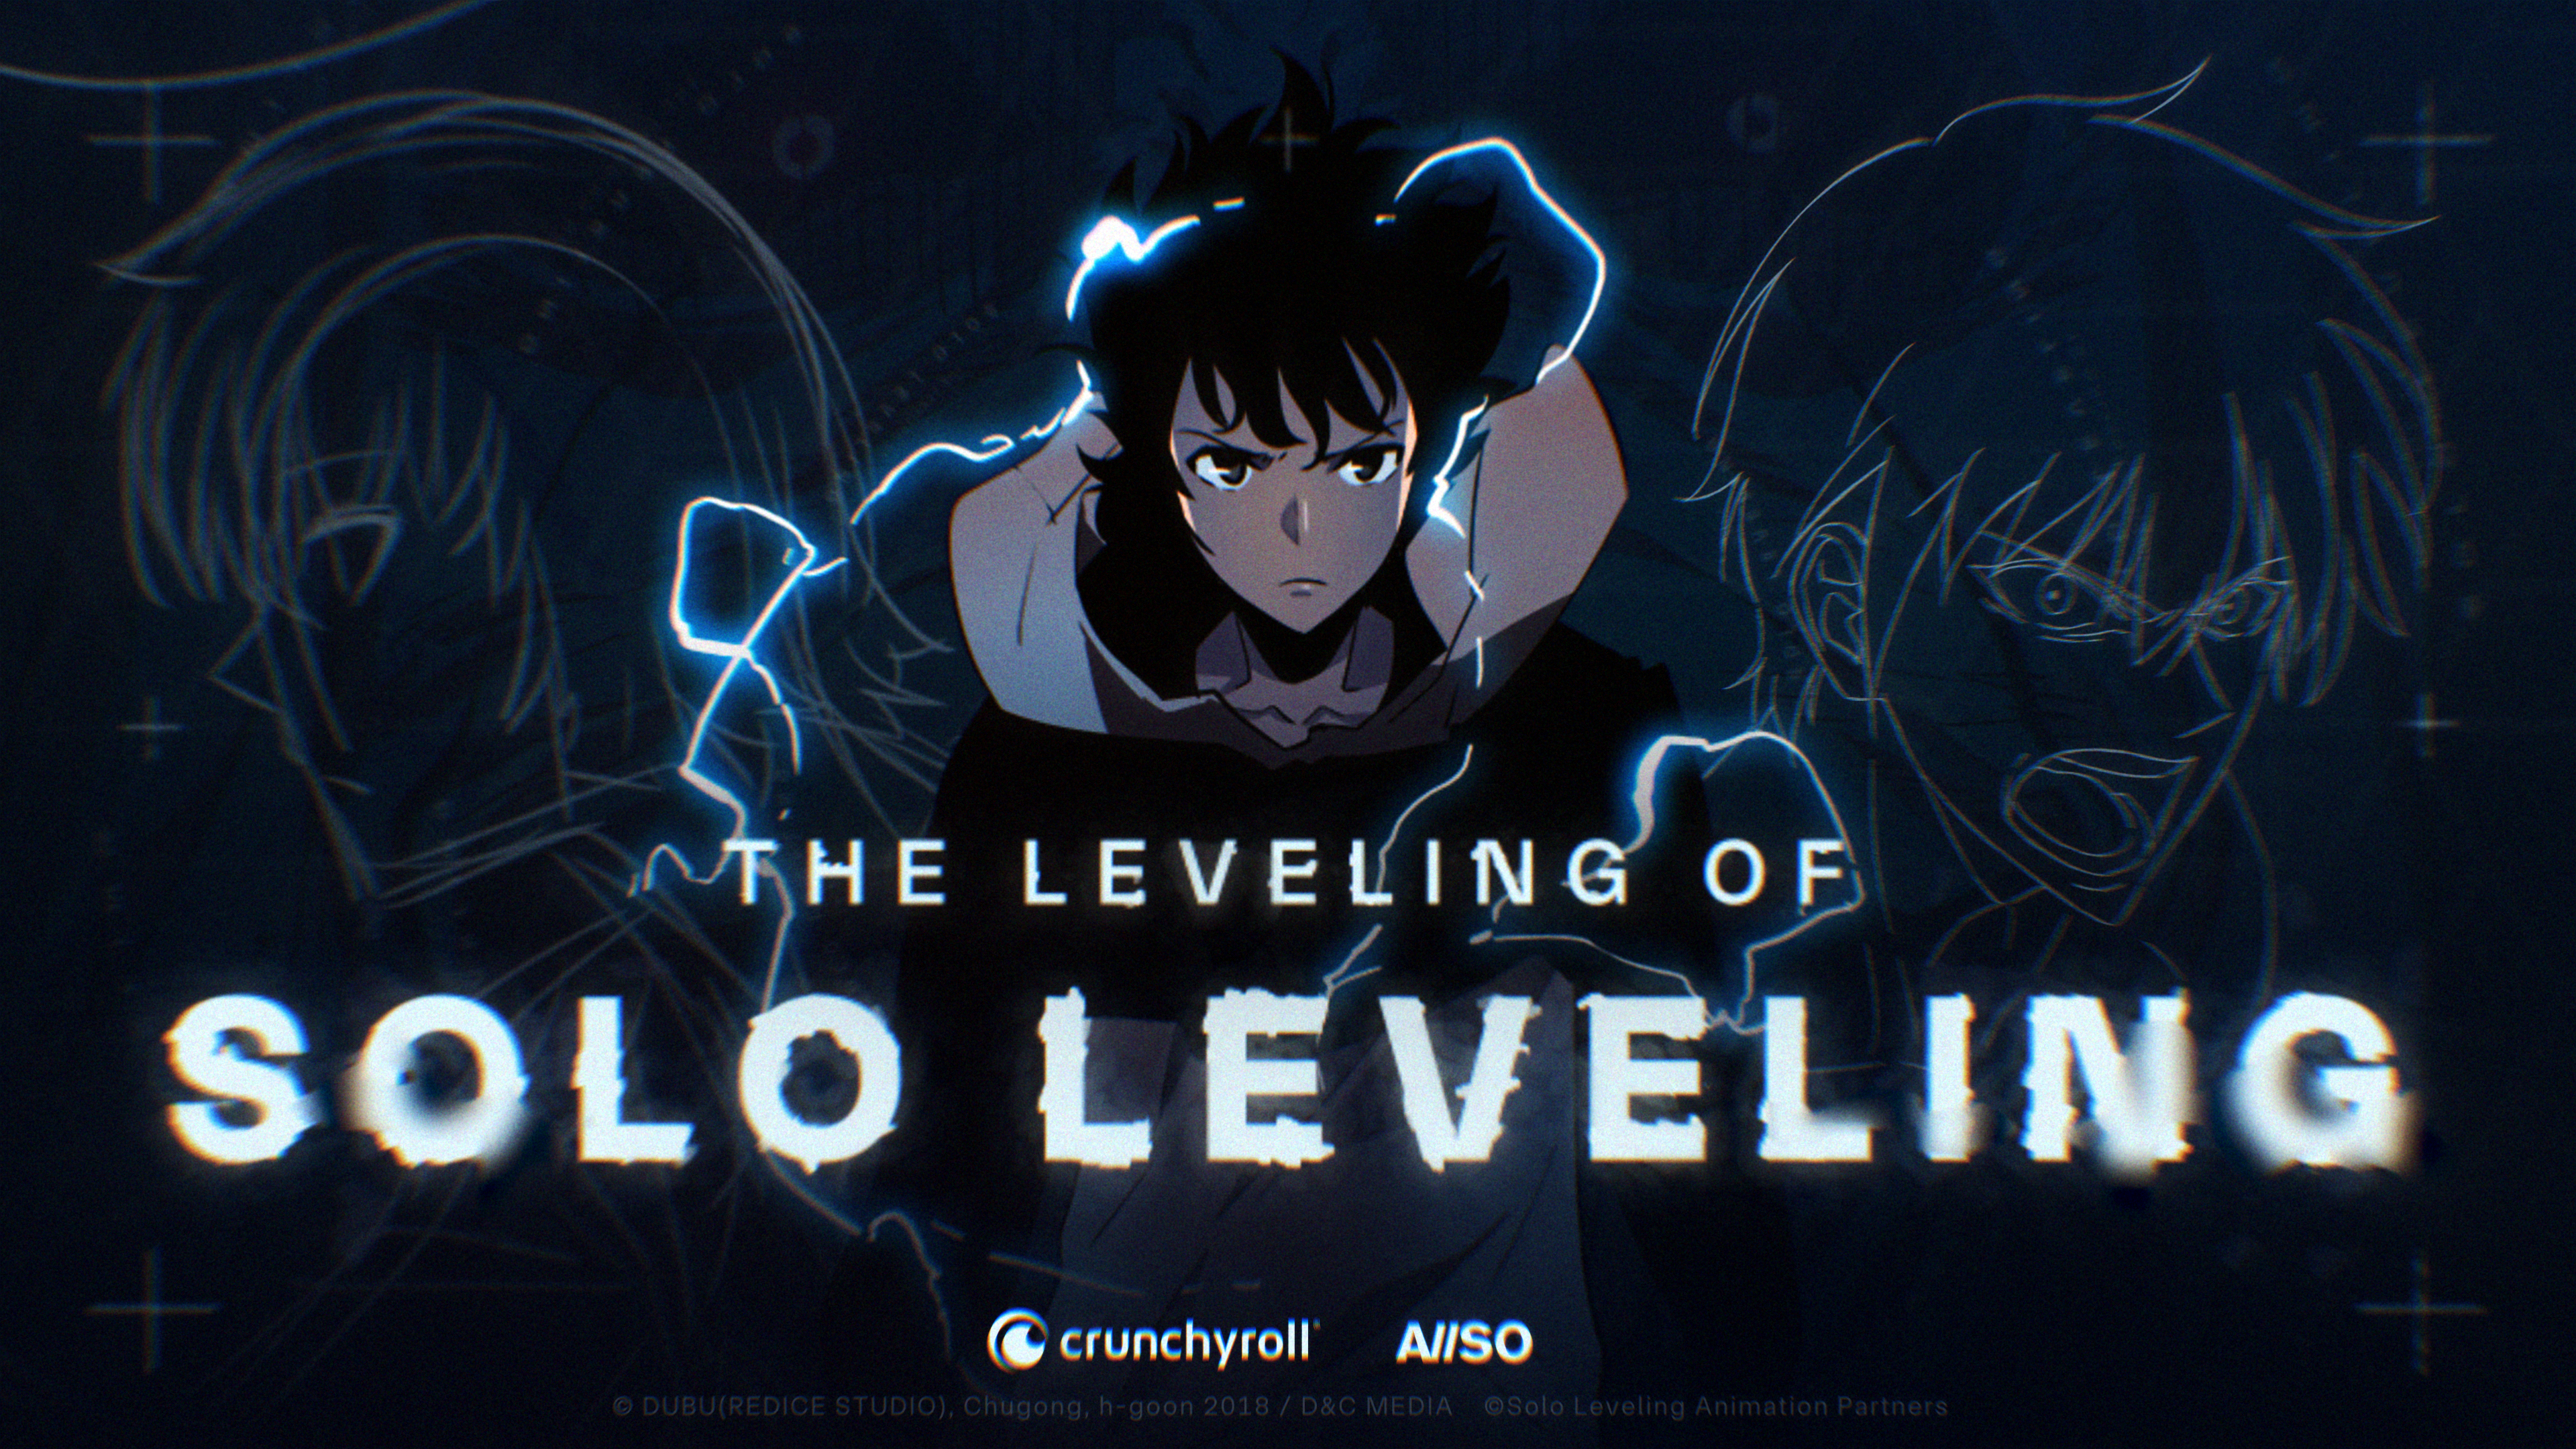 NEWS: The Leveling of Solo Leveling, Crunchyroll’s Exclusive Documentary Out Today